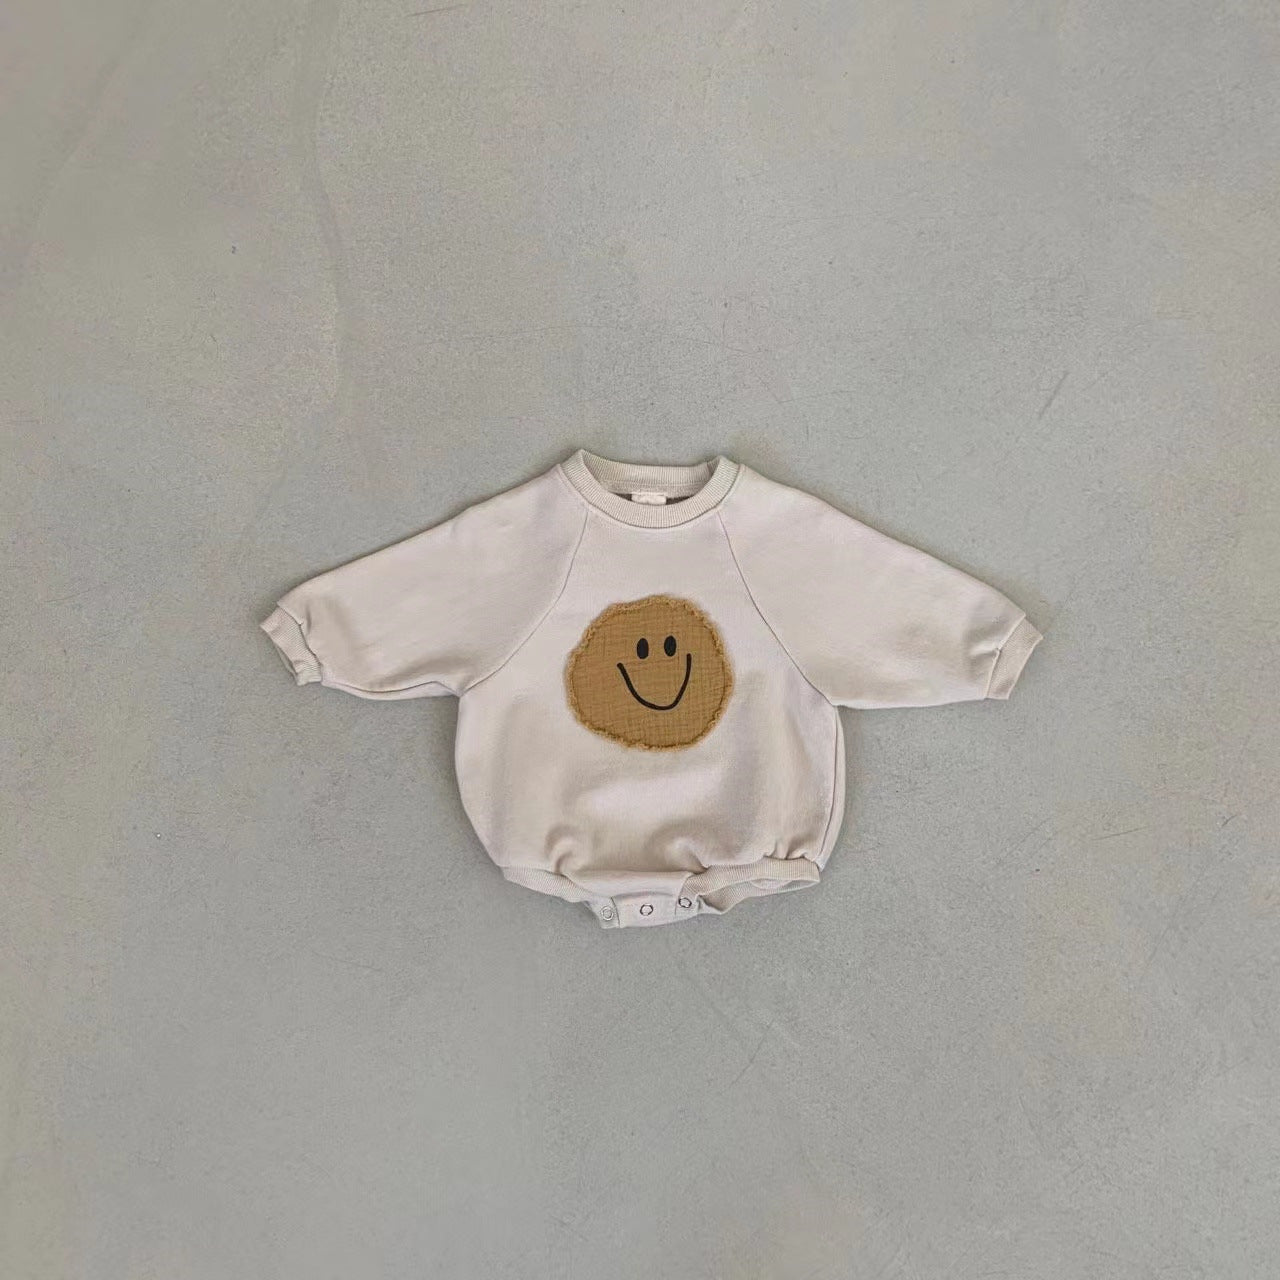 Baby Smiling Face Romper.